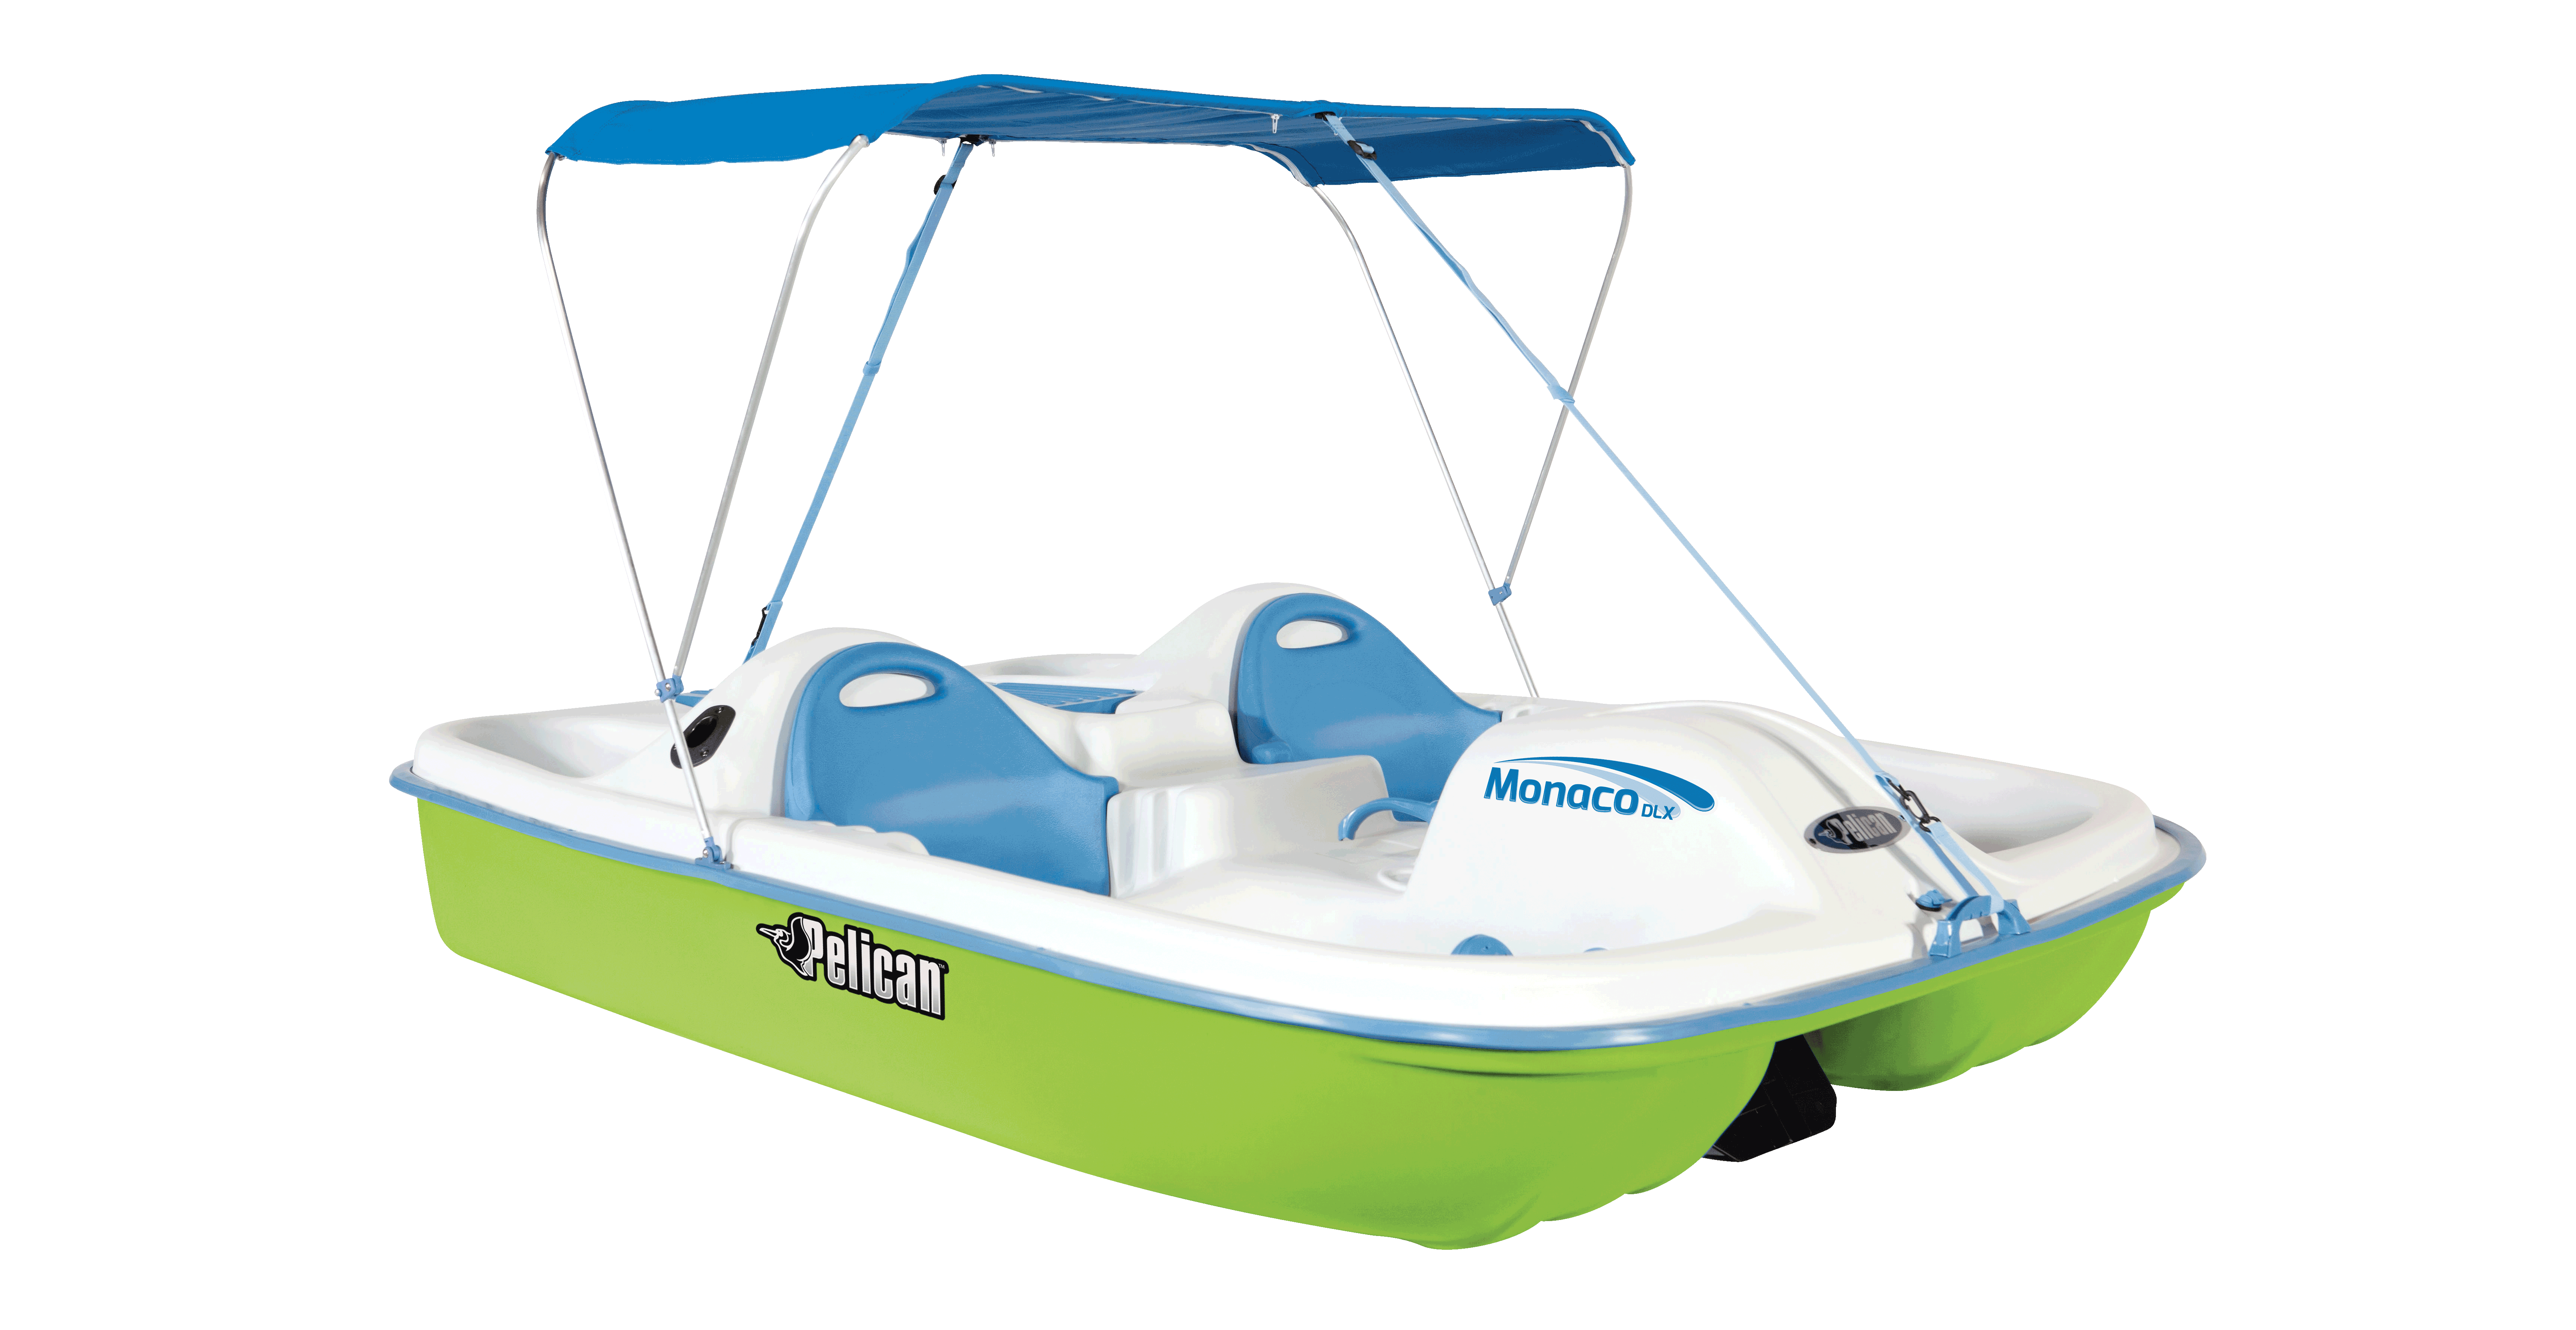 Pelican Pedal Boat Monaco DLX Angler Adjustable 5 Seat Pedal Boat with Canopy